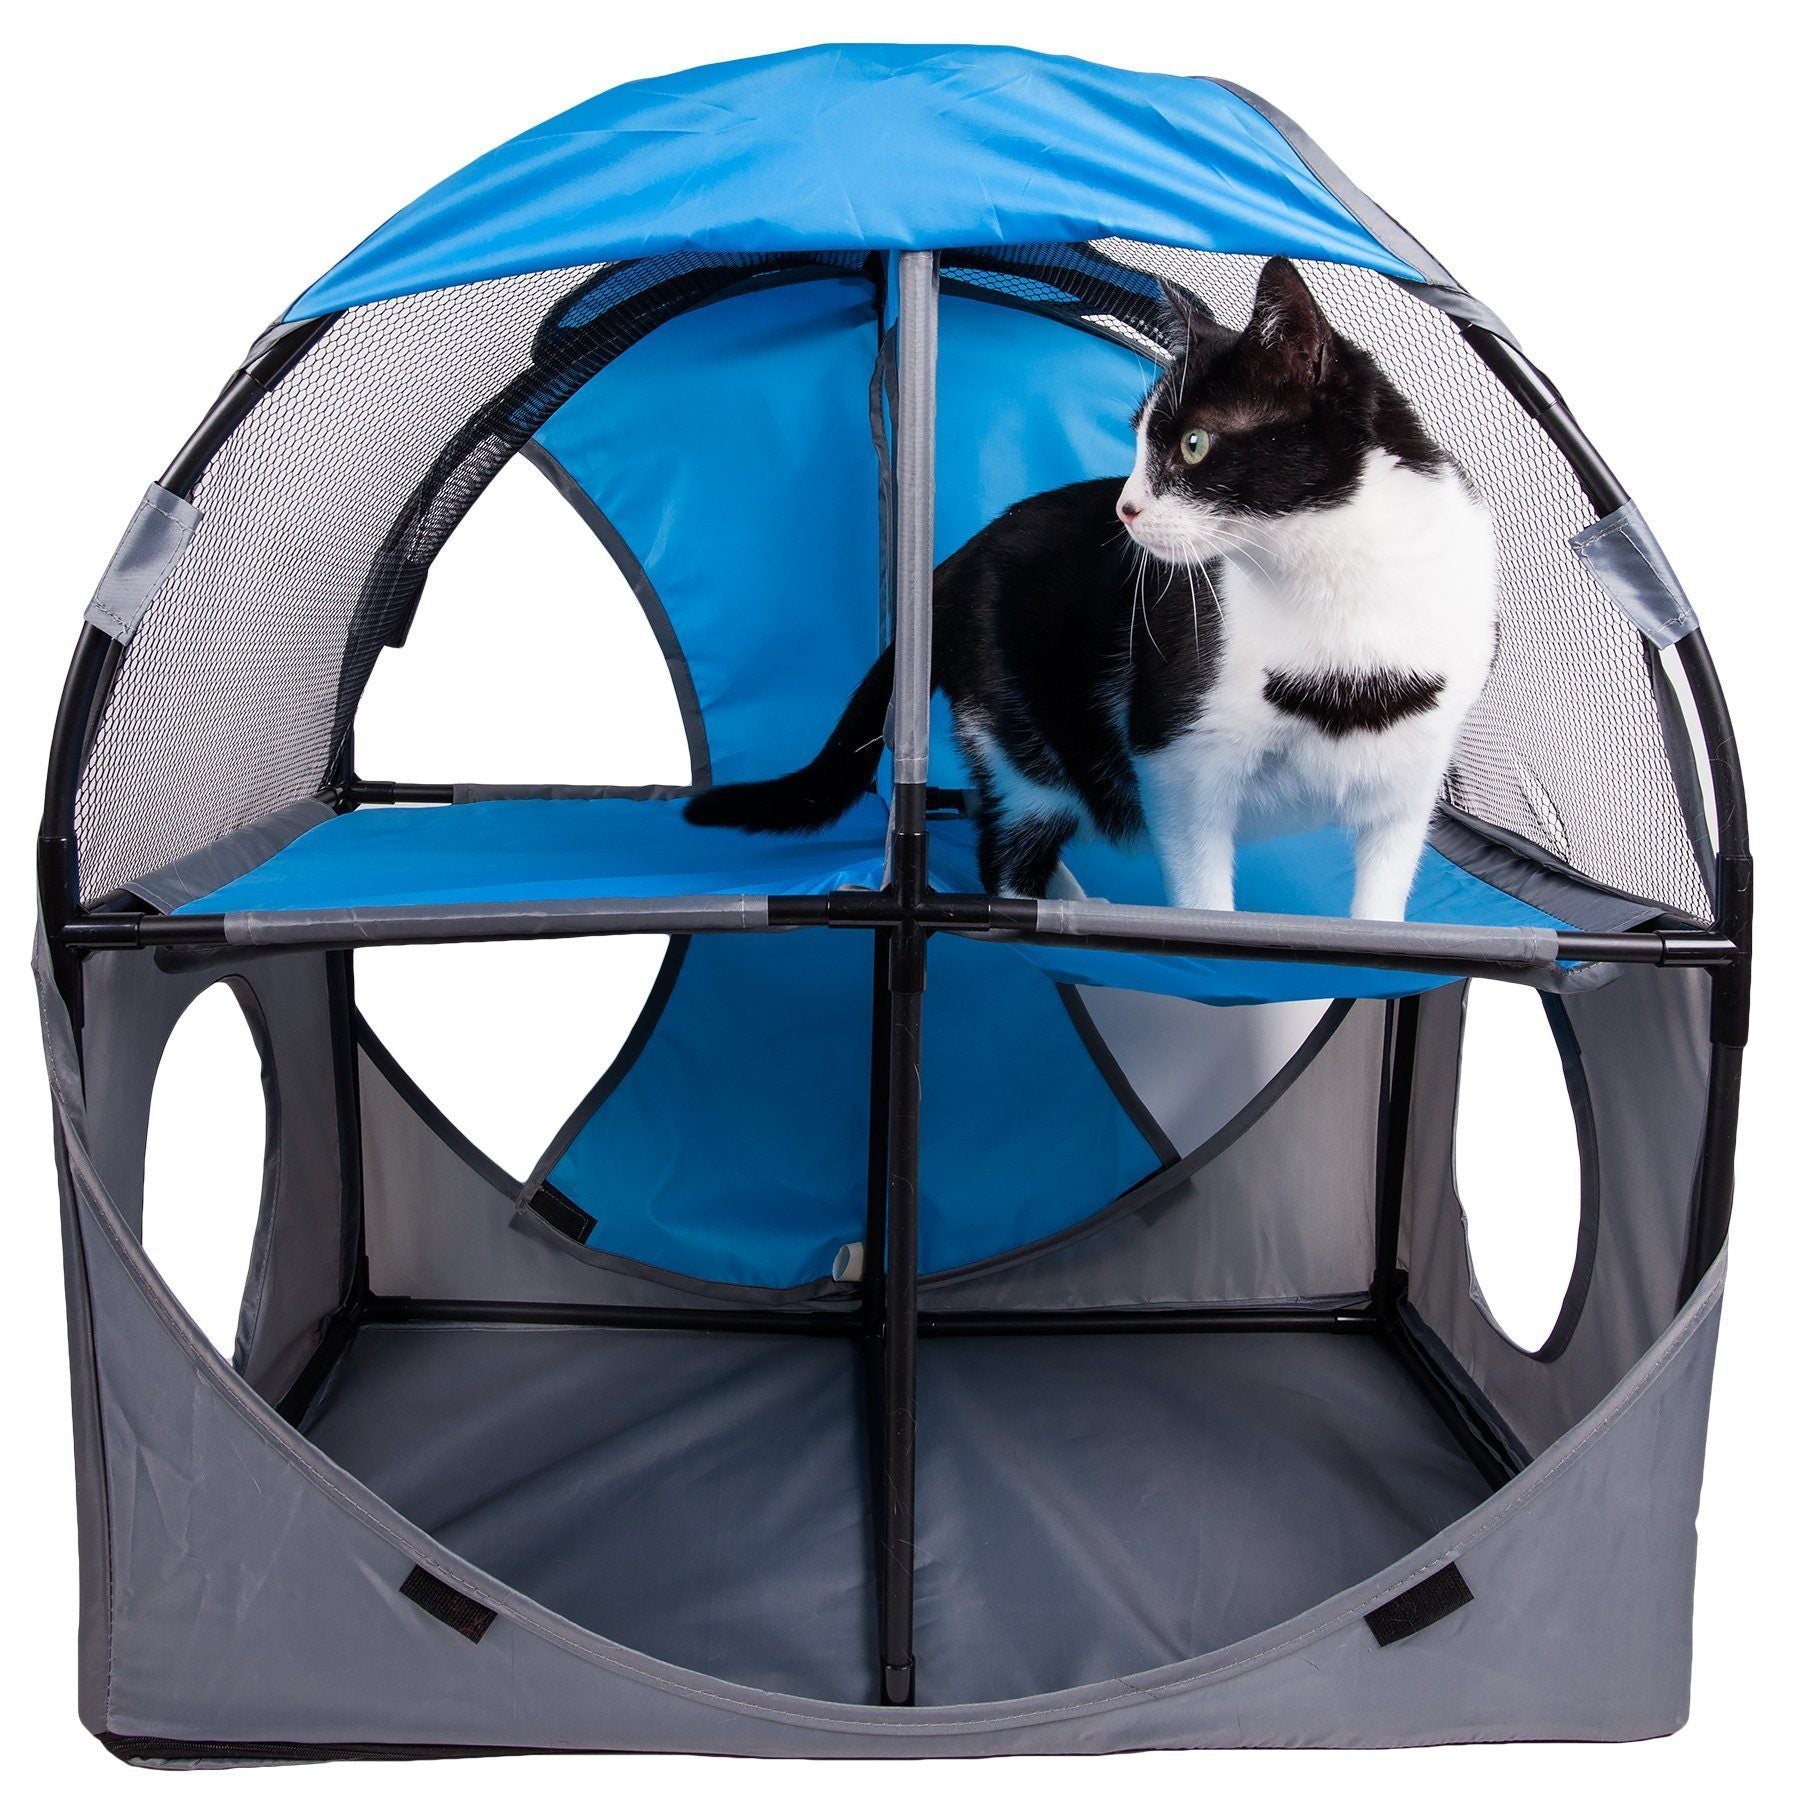 Pet Life ® 'Kitty-Play' Collapsible Travel Interactive Kitty Cat Tree Maze House Lounger Tunnel Lounge Blue, Grey 